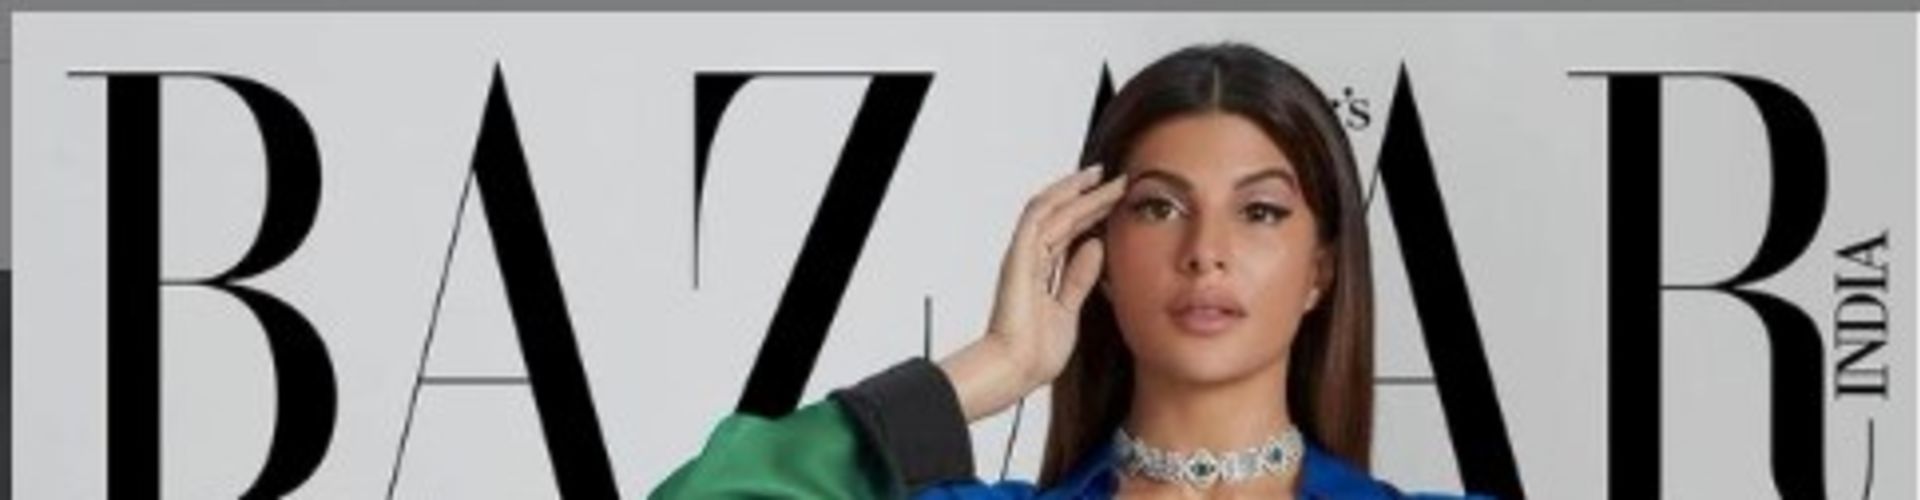 Jacqueline Fernandes becomes the cover girl for Bazaar India